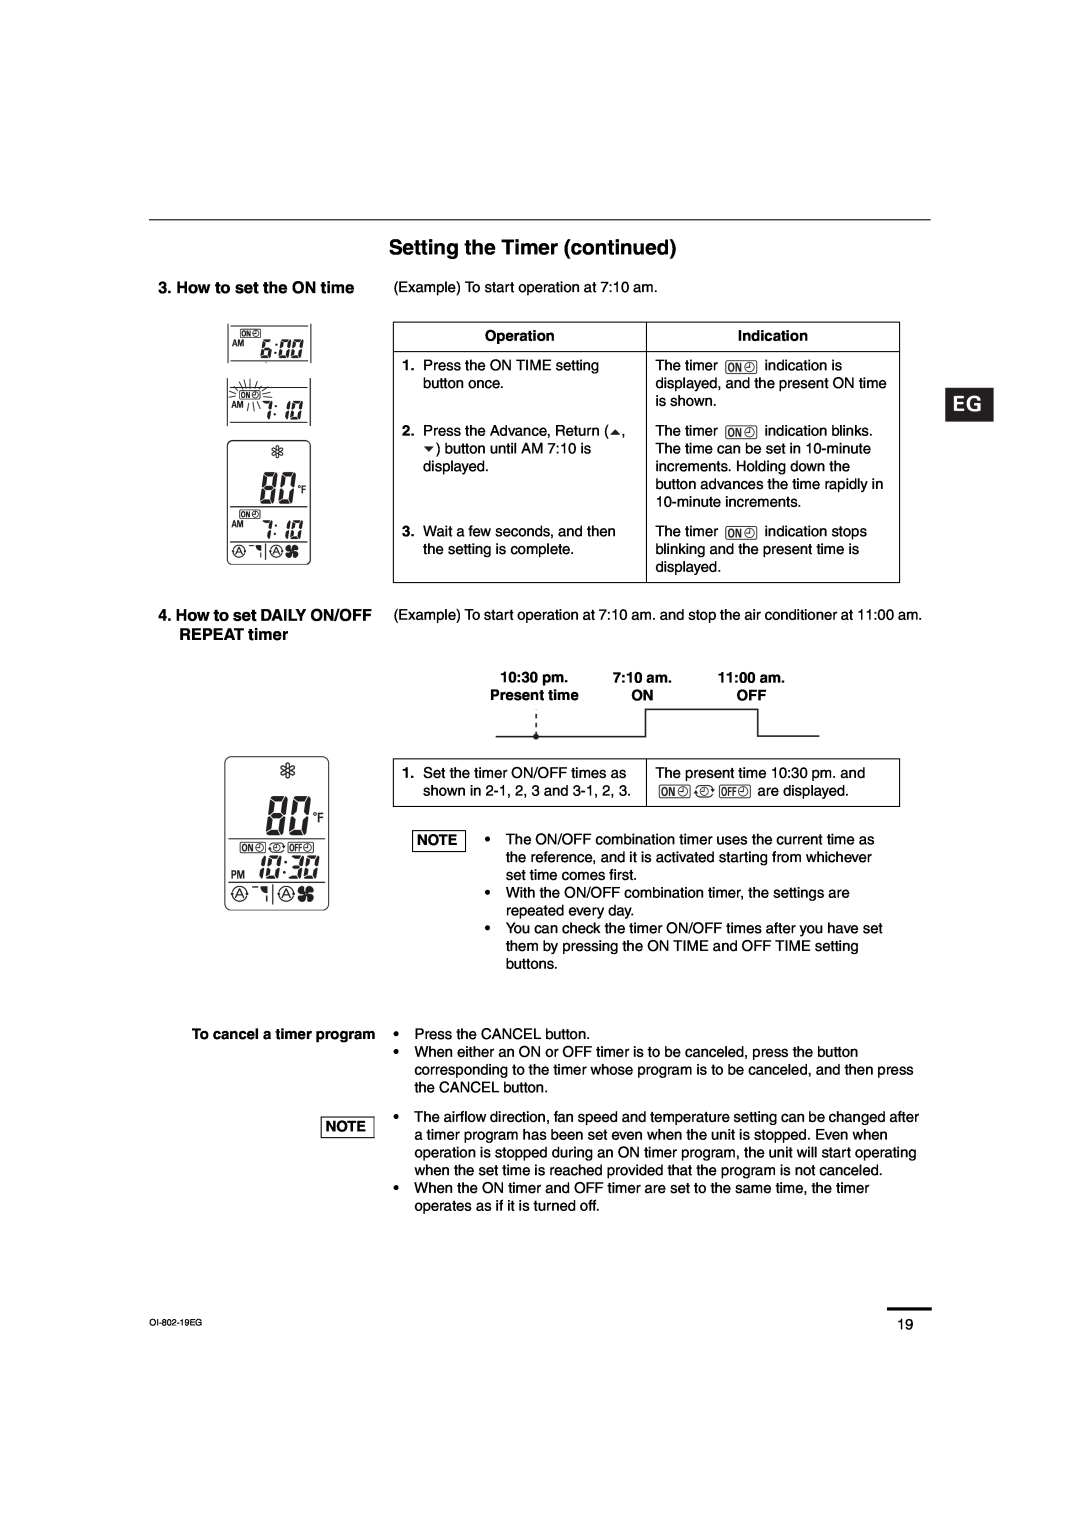 Sanyo CH1271, CH0971 service manual Setting the Timer continued, REPEAT timer 